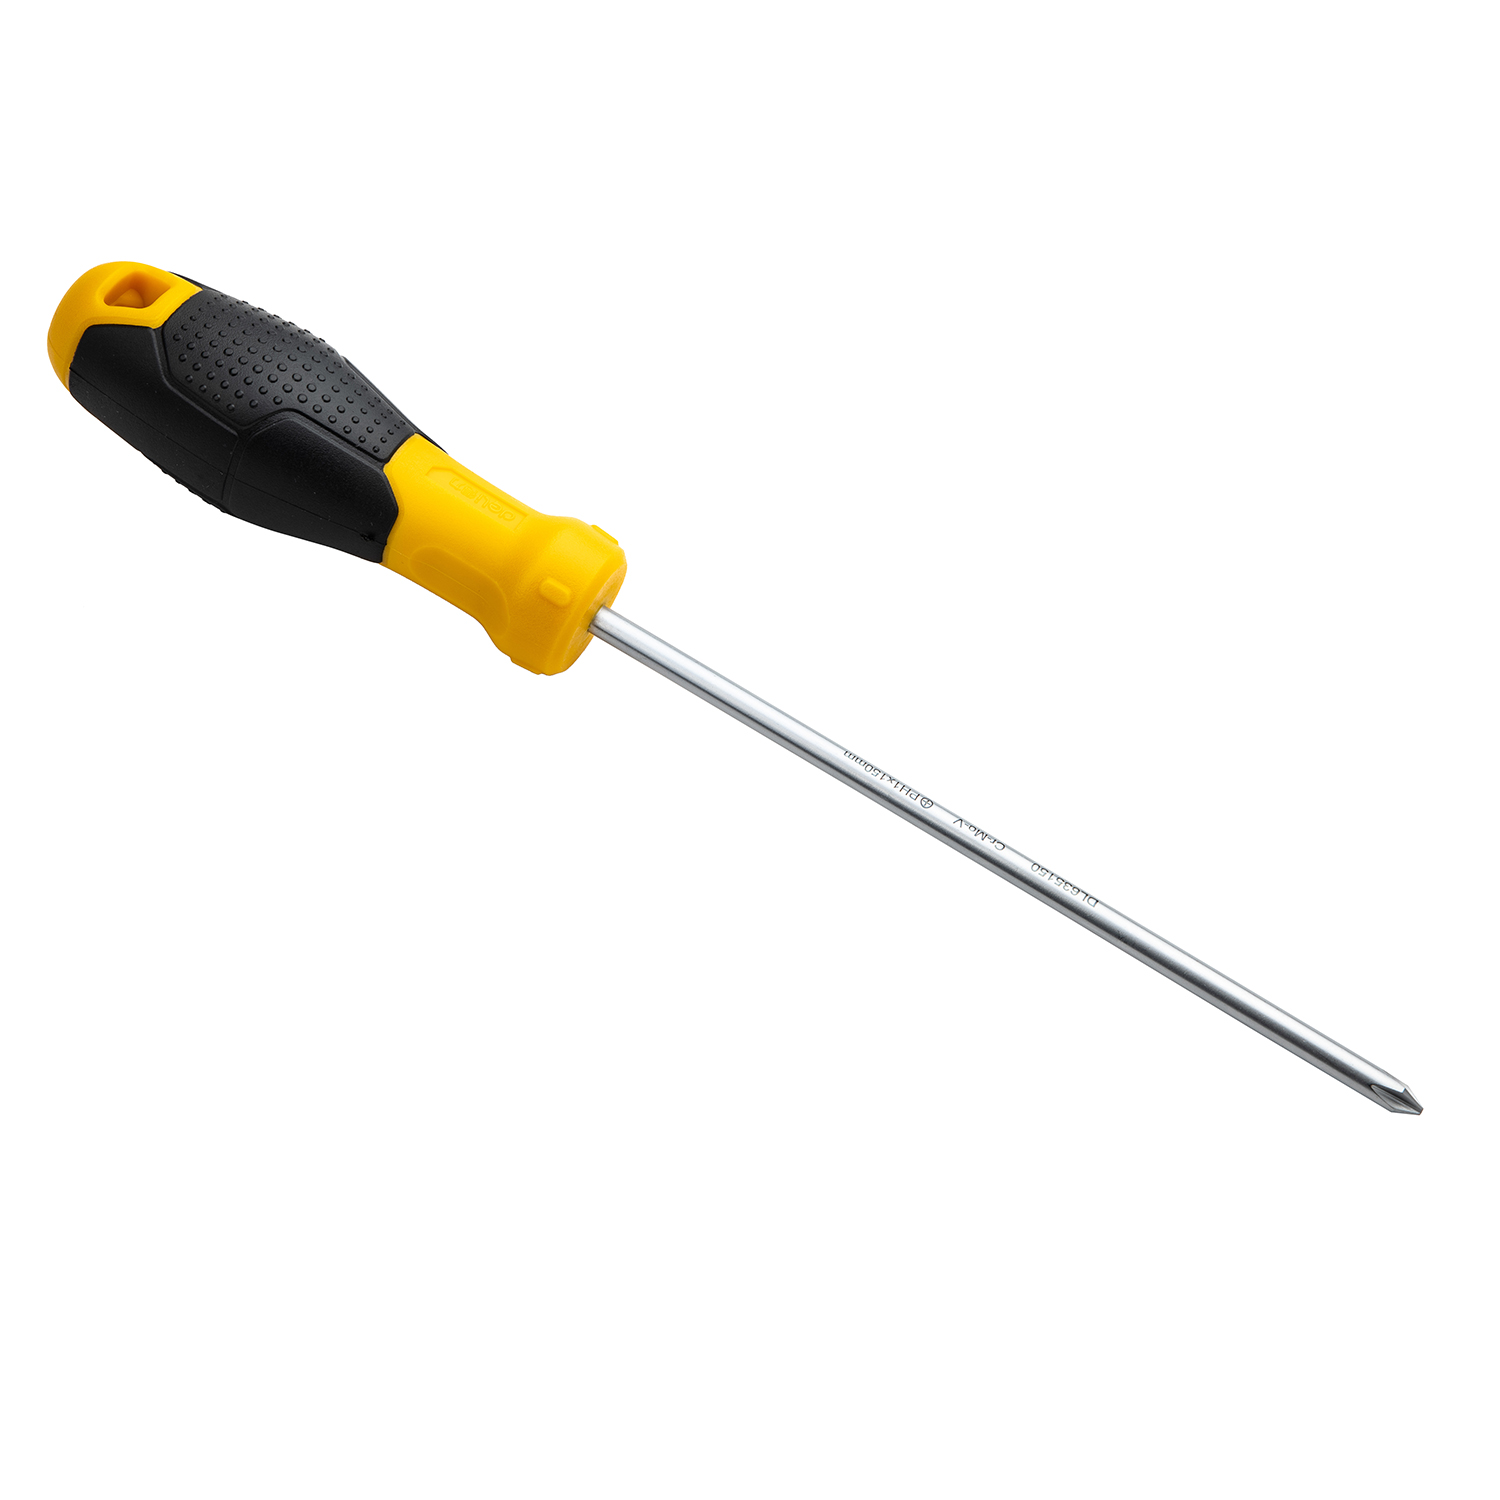 Precision Phillips Screwdriver for keyboard